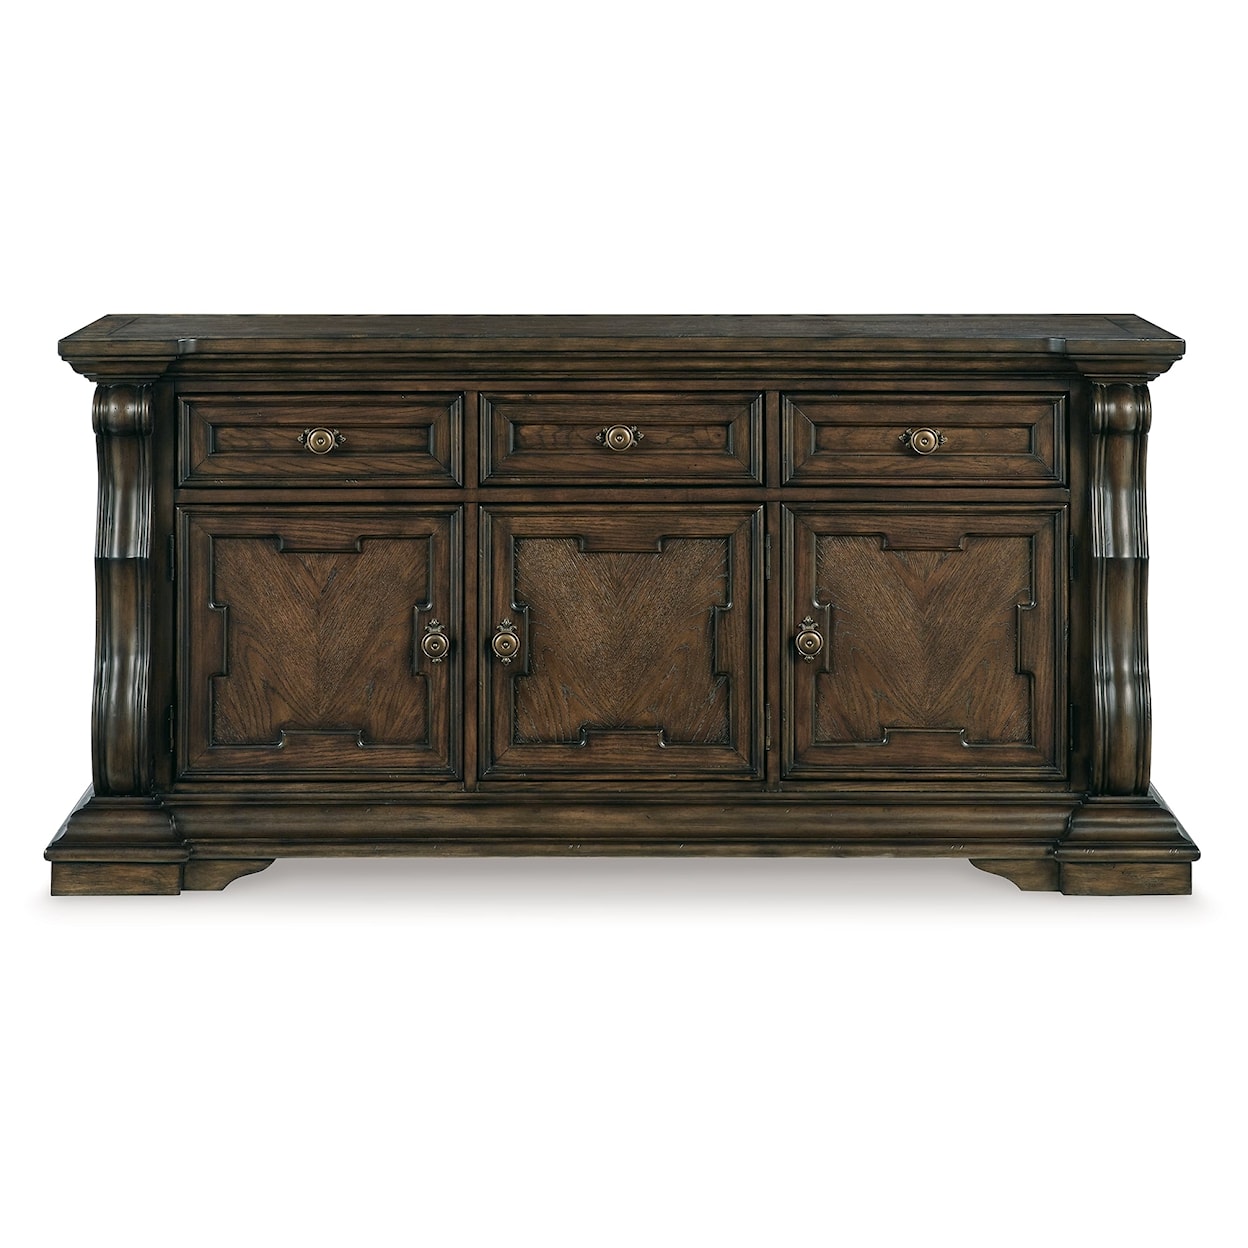 Signature Design by Ashley Furniture Maylee Dining Room Buffet